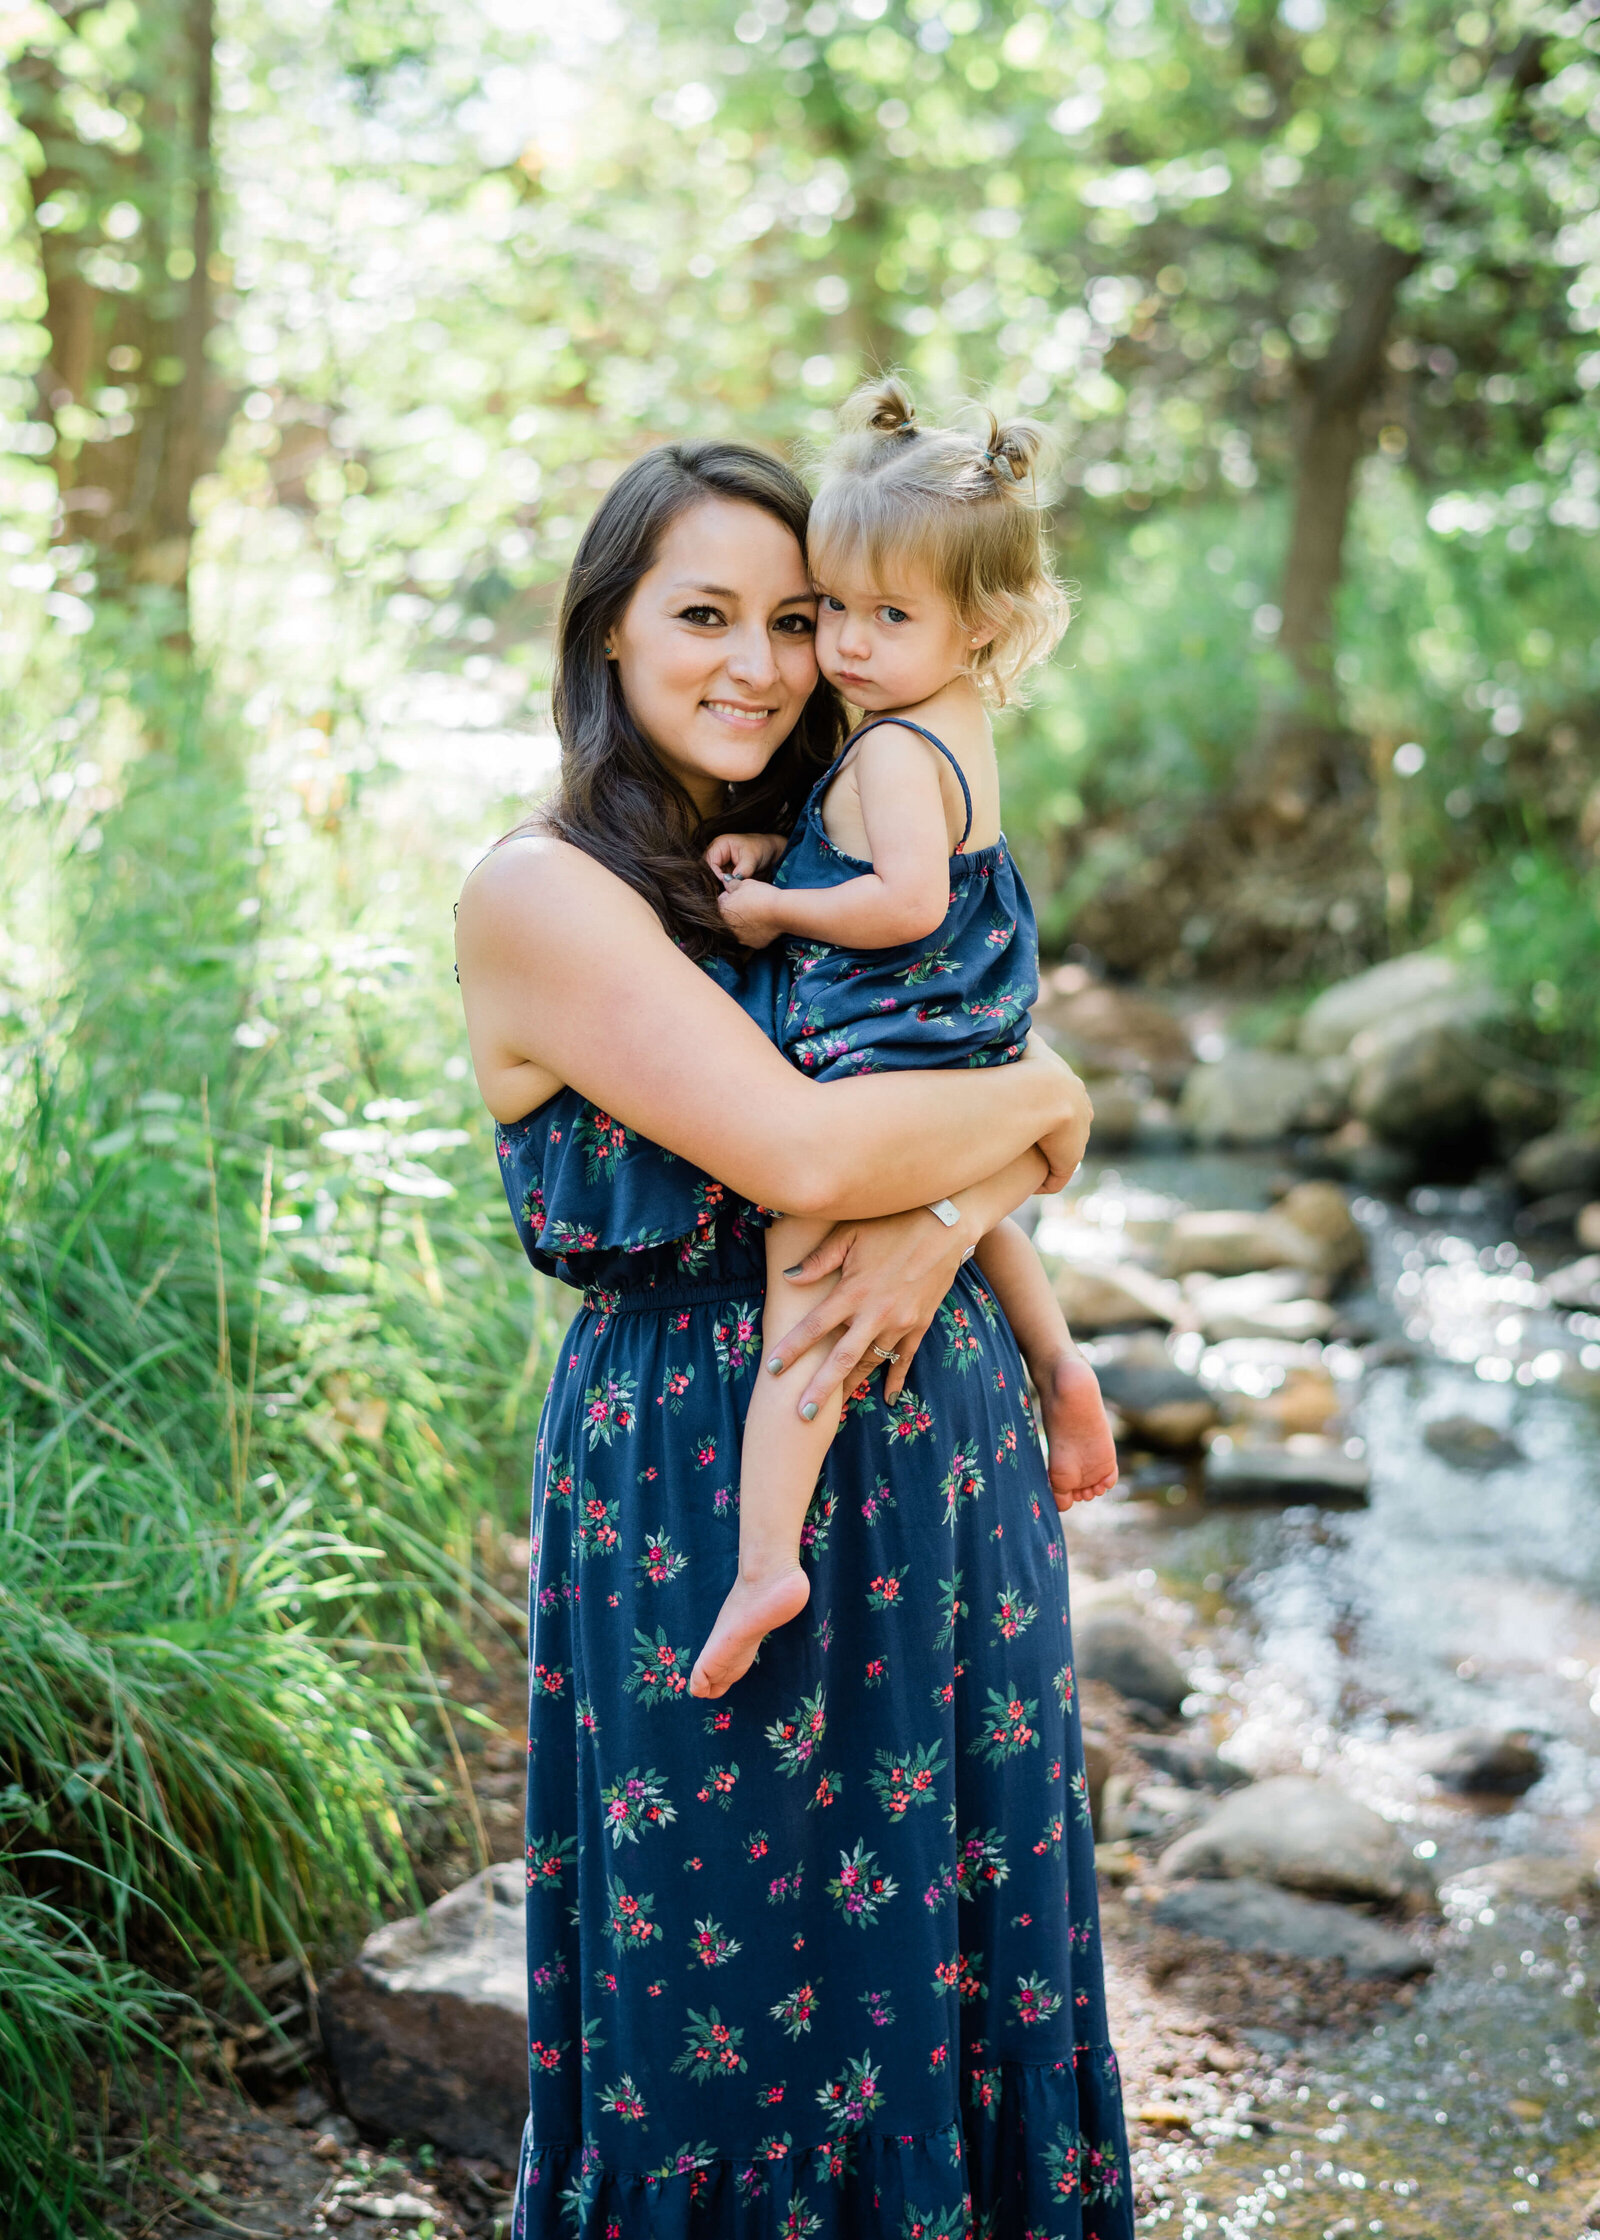 Northern Virginia family photographer captures an image of a brunette mother holding her toddler daughter, they are wearing matching navy dresses and are standing in a stream